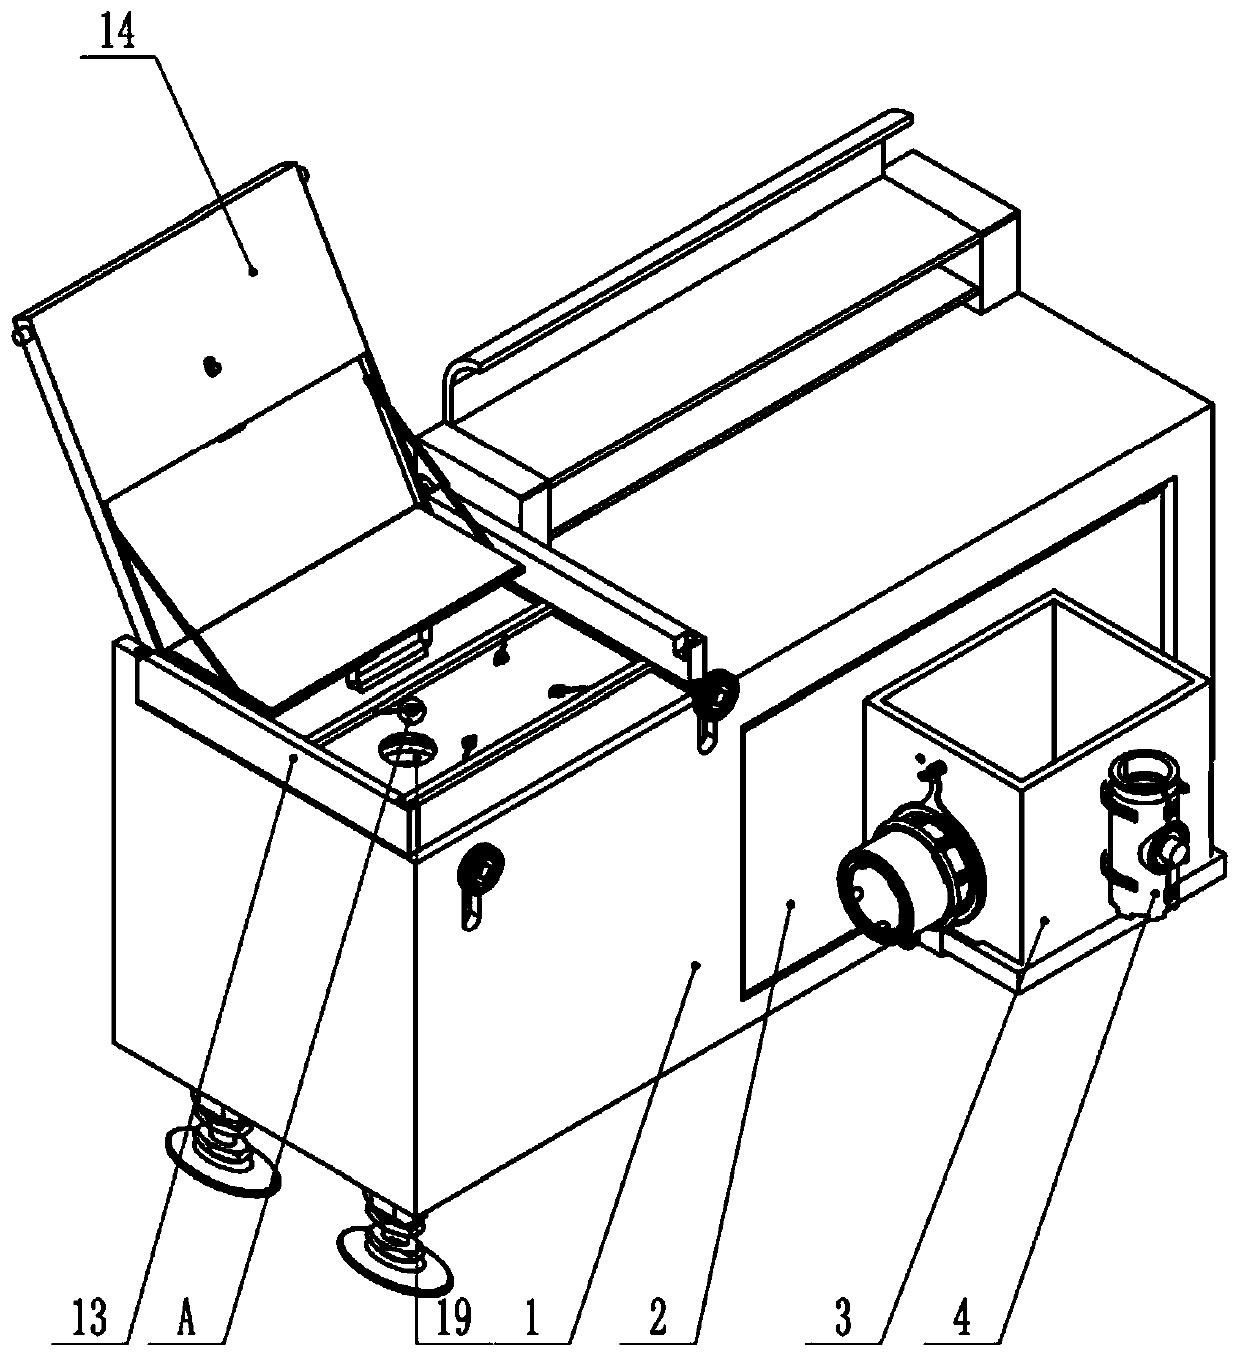 Functional experiment fixing device